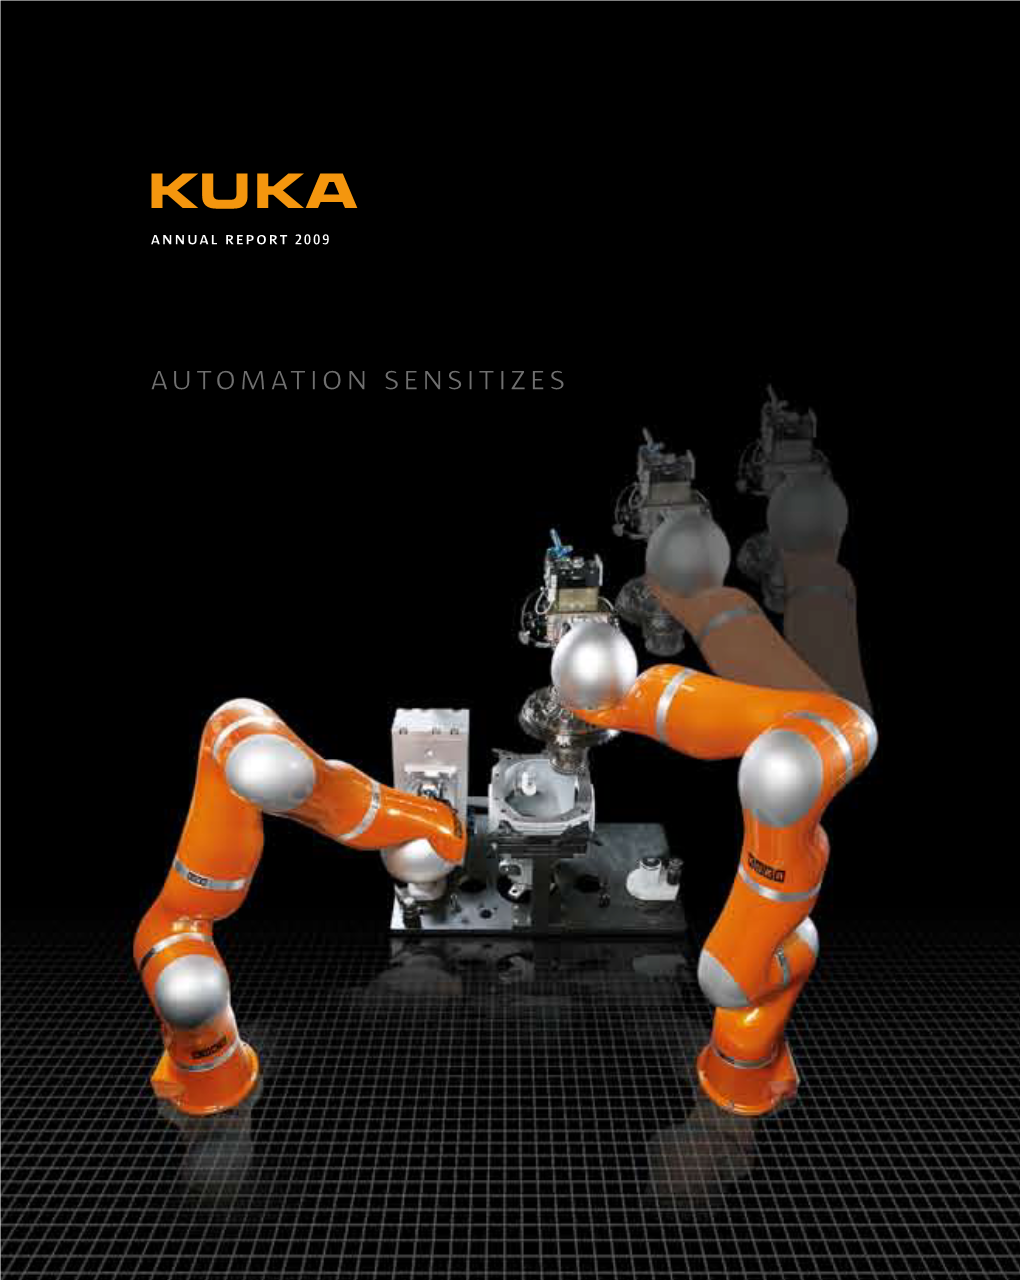 Automation Sensitizes February 2, 2011 Preliminary Figures for the 2010 Financial Year